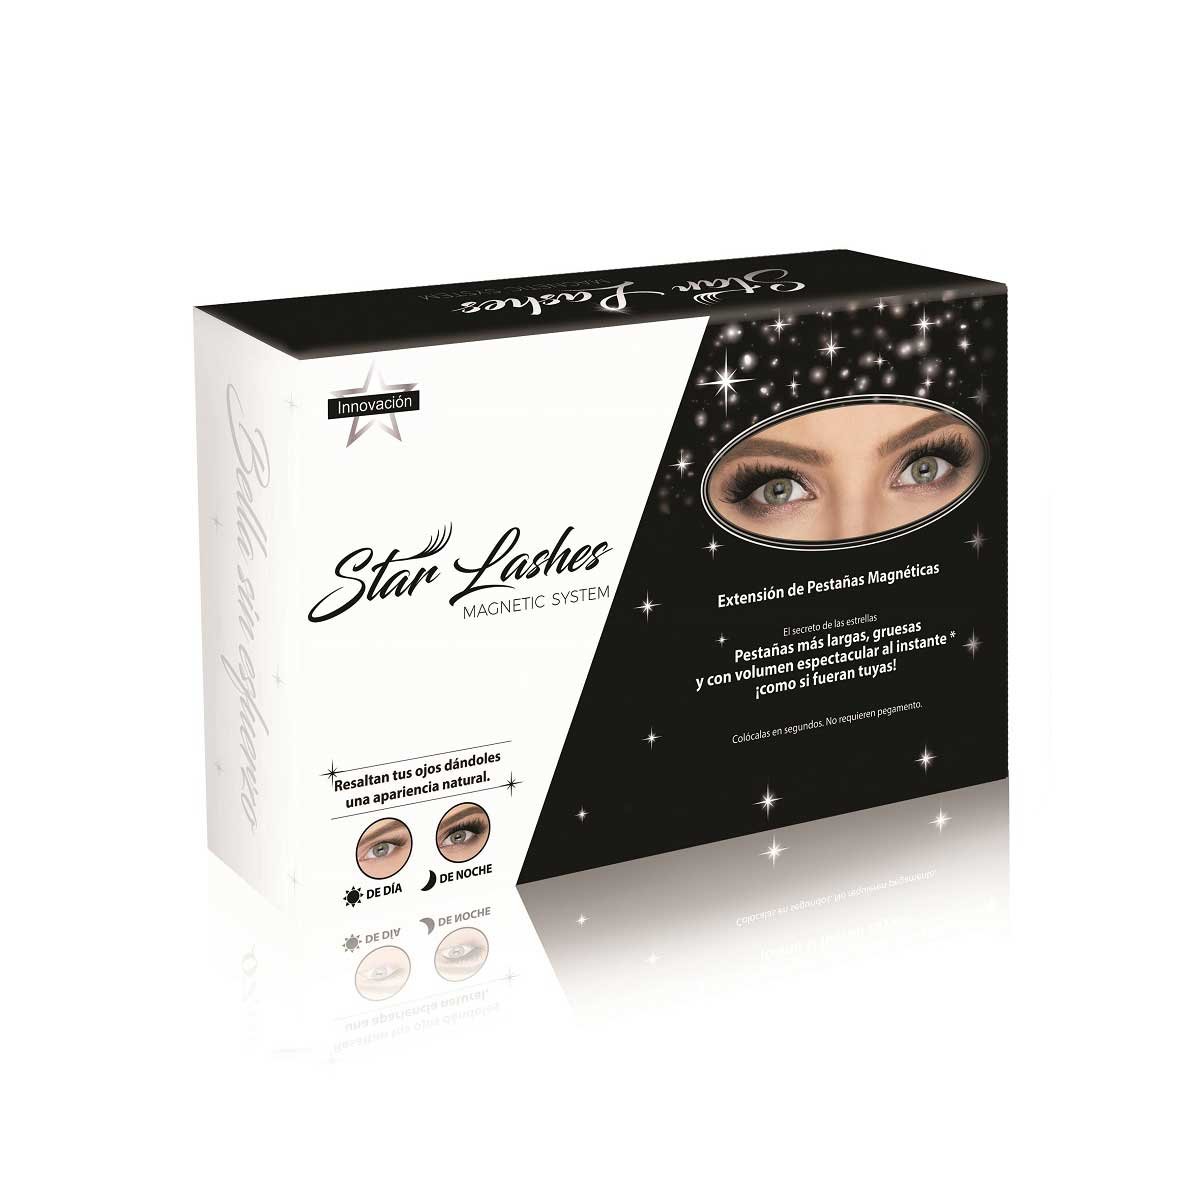 Star Lashes Magnetic System